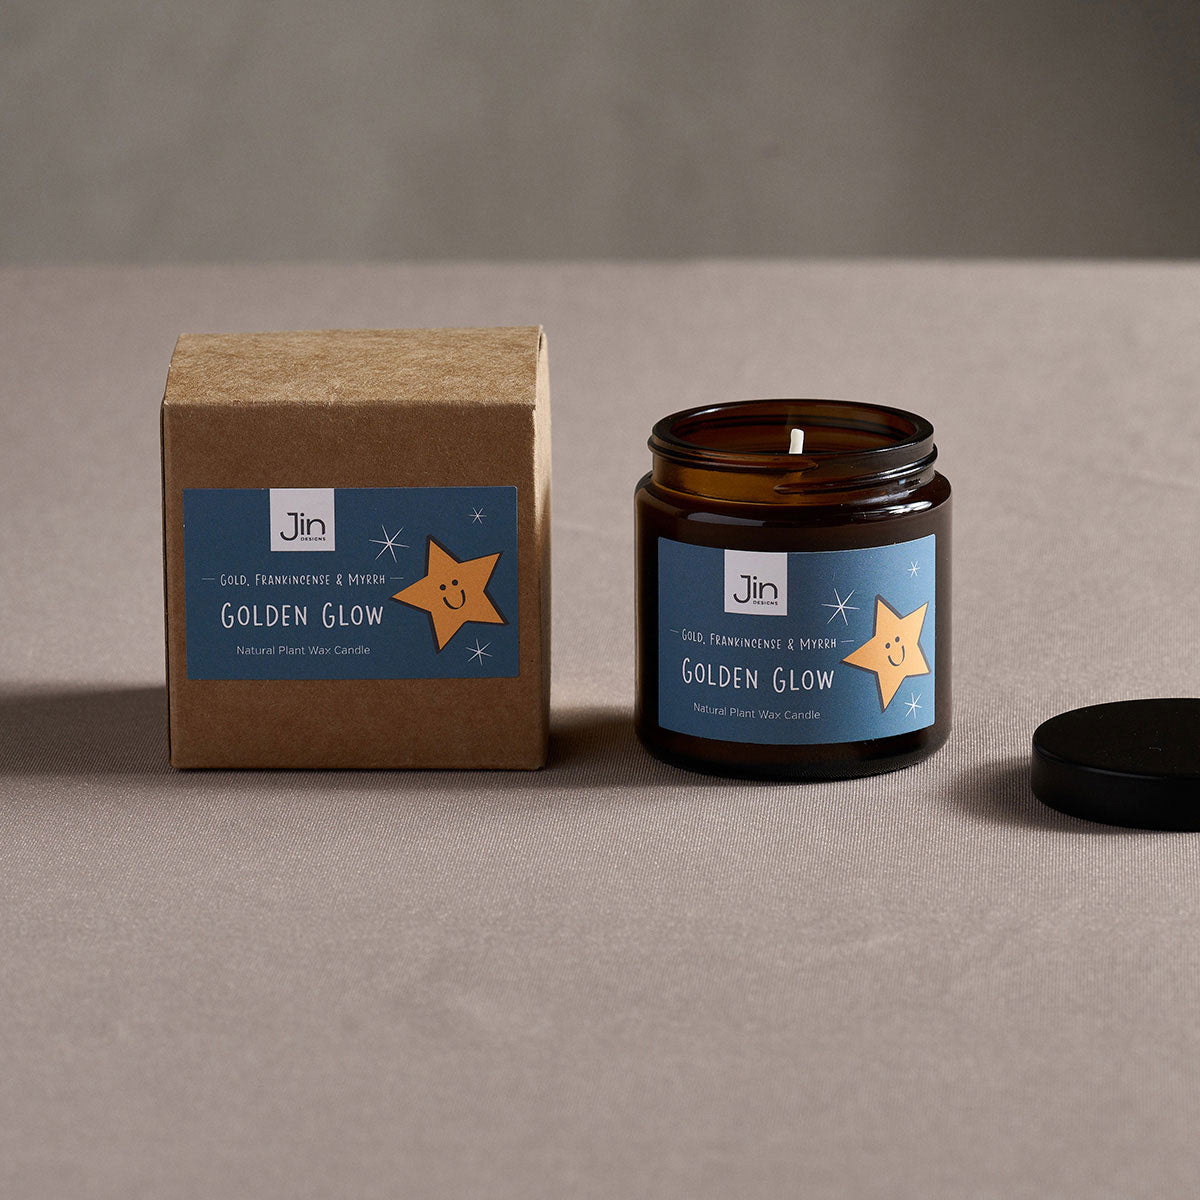 Star Candle - Gold, Frankincense & Myrrh - with gift box